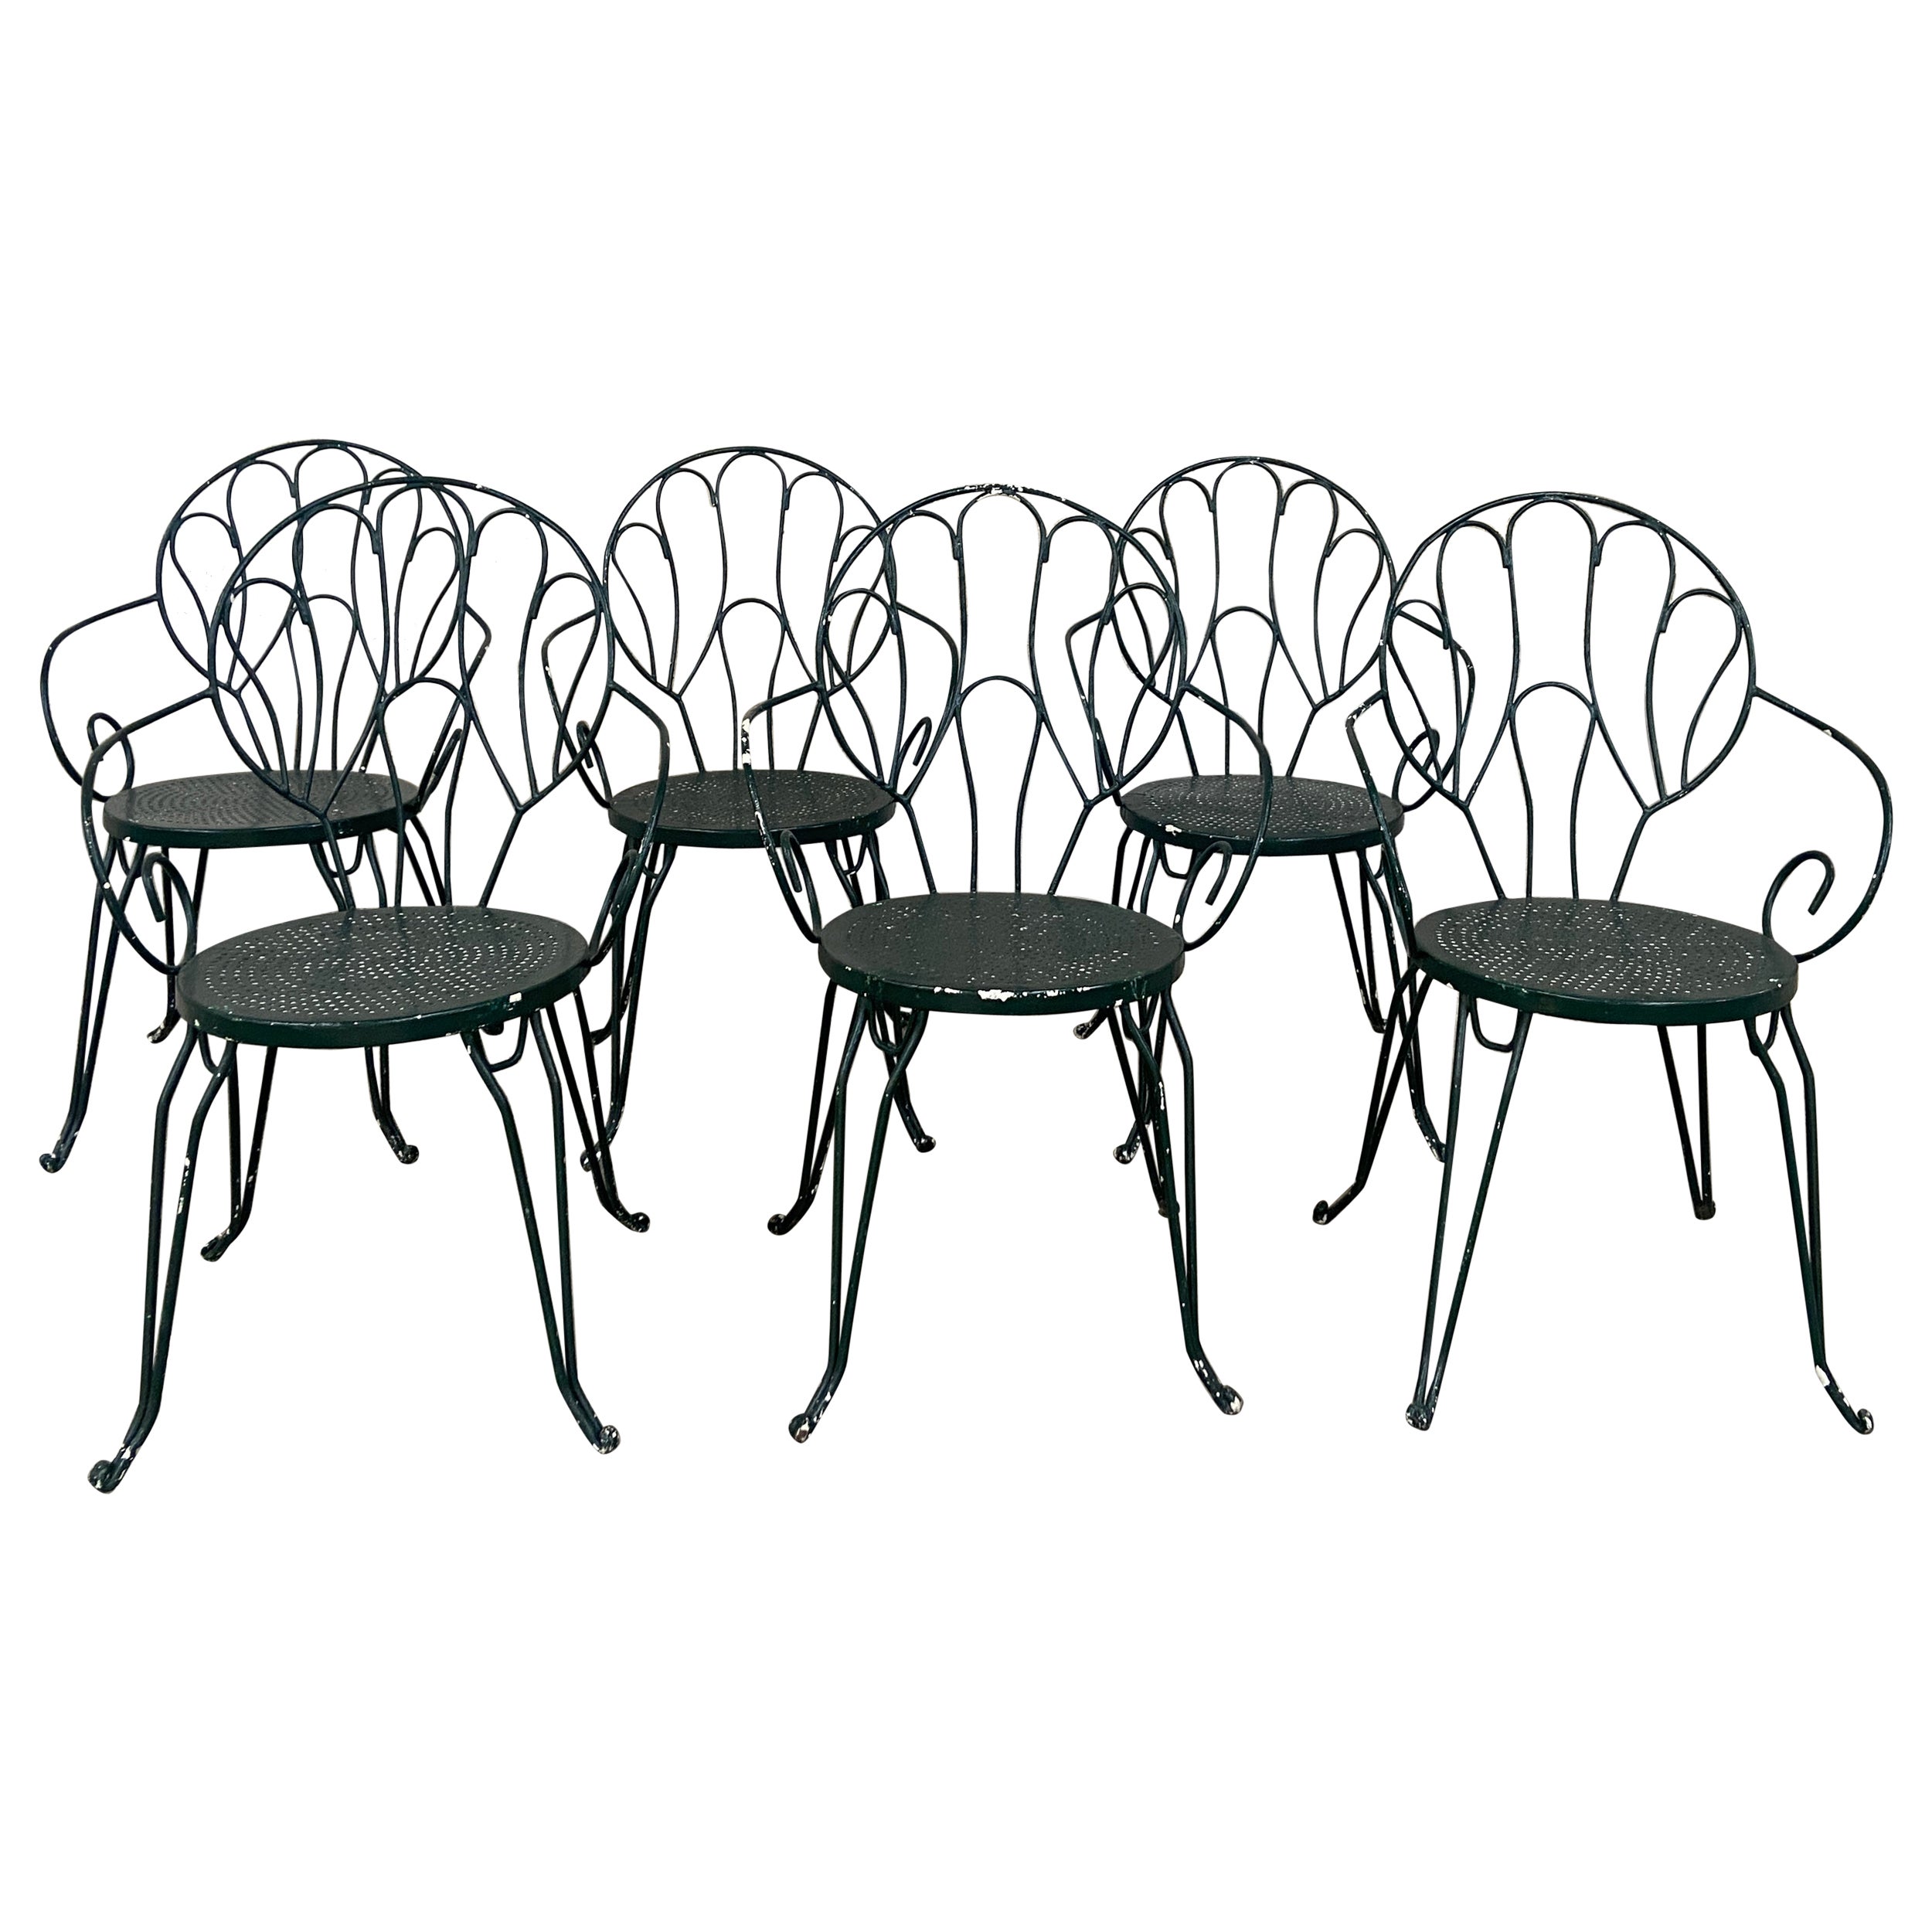 Mid-Century Modern Italian Set of Green Painted Iron Garden Chairs from 1960s For Sale